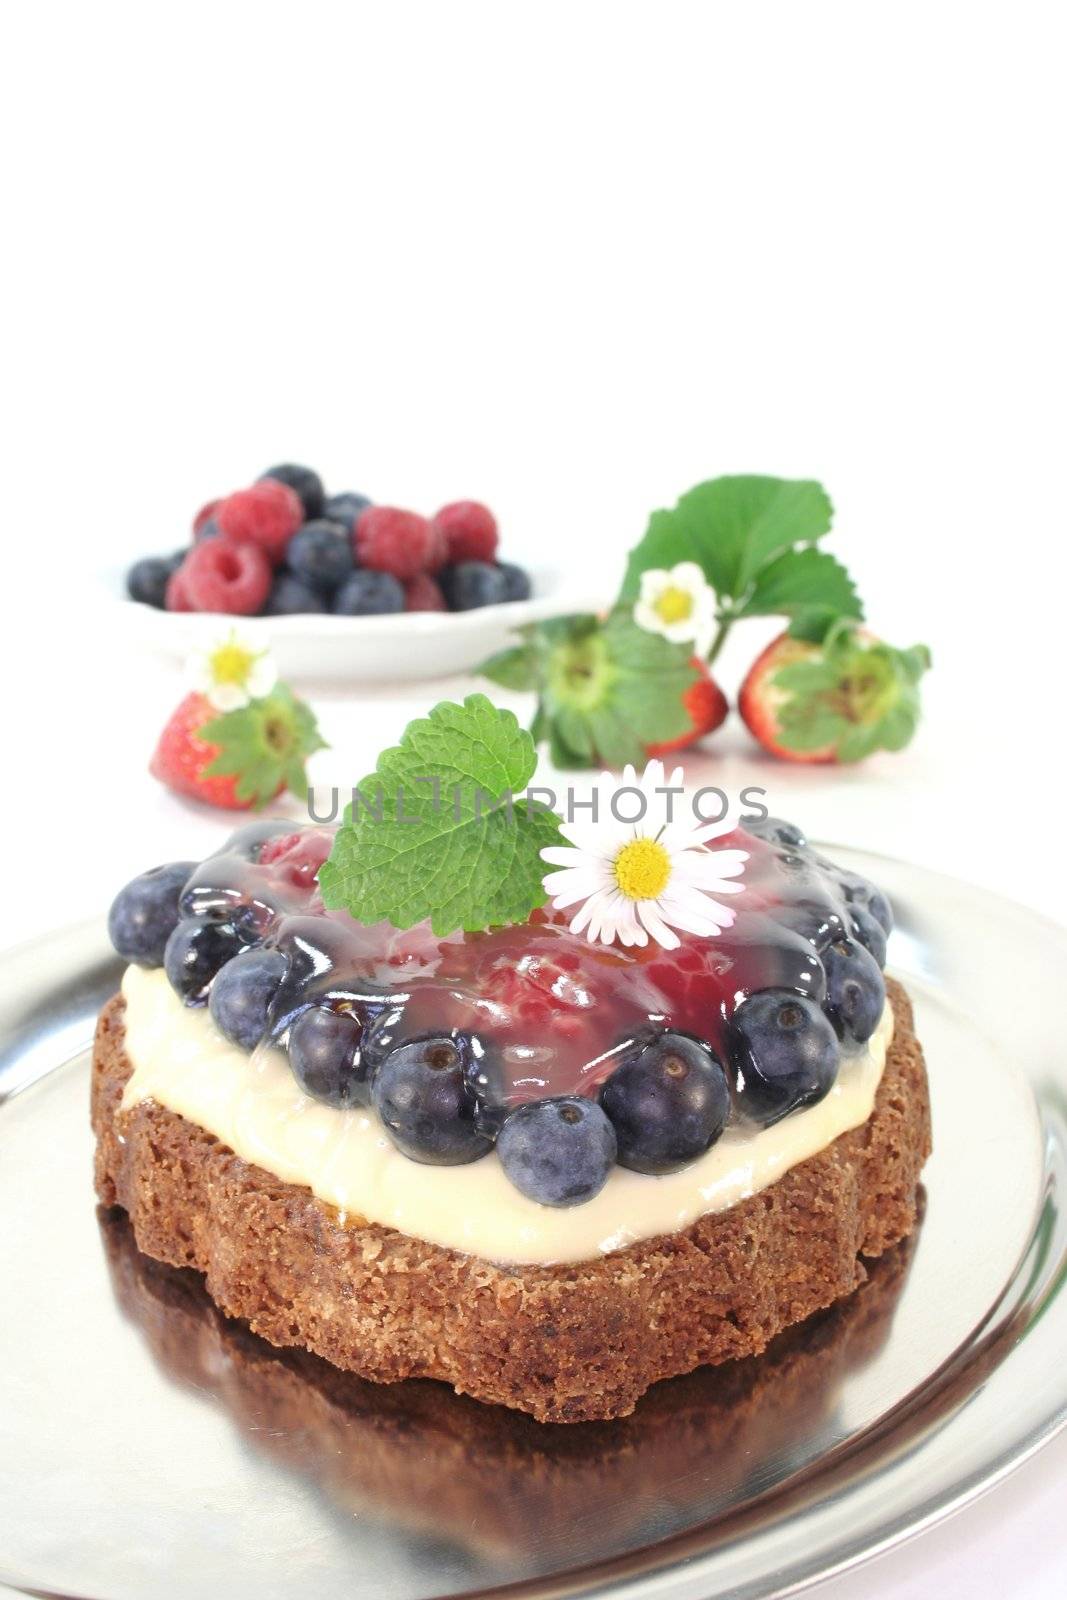 heart-shaped fruit tart with forest berries, lemon balm and daisies